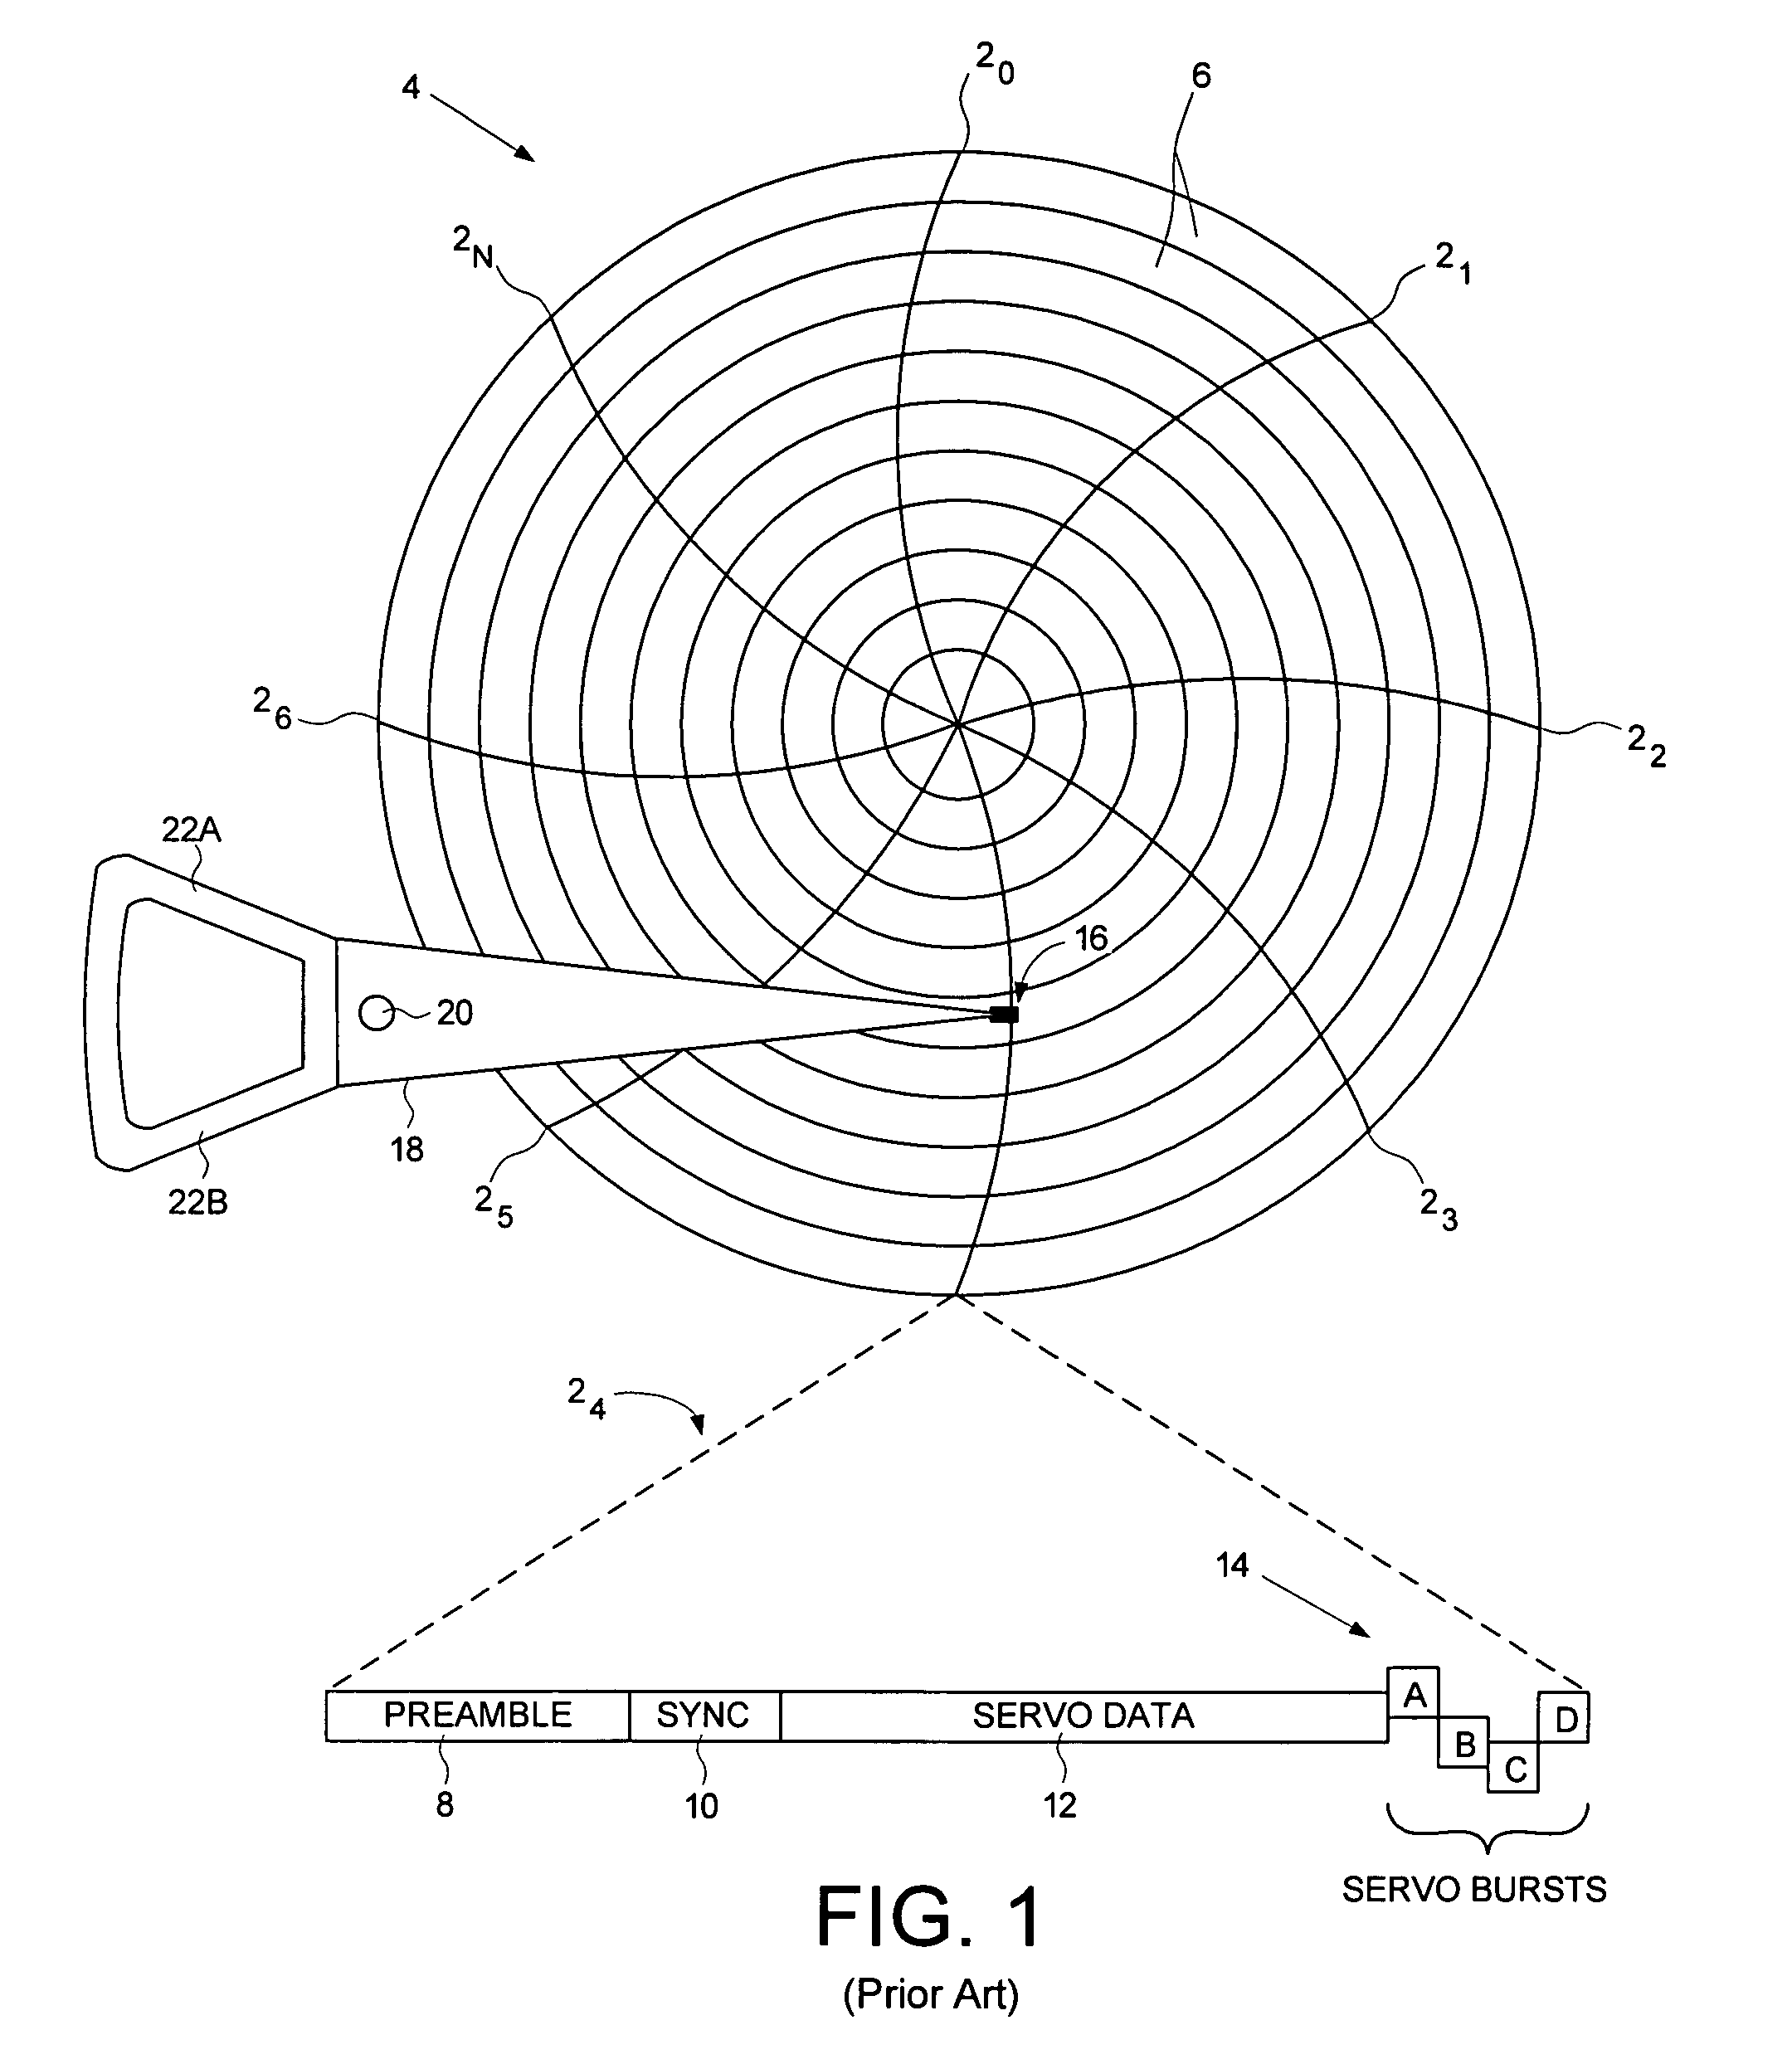 Servo writing a disk drive by overwriting a harmonic frequency fill pattern in the servo burst area